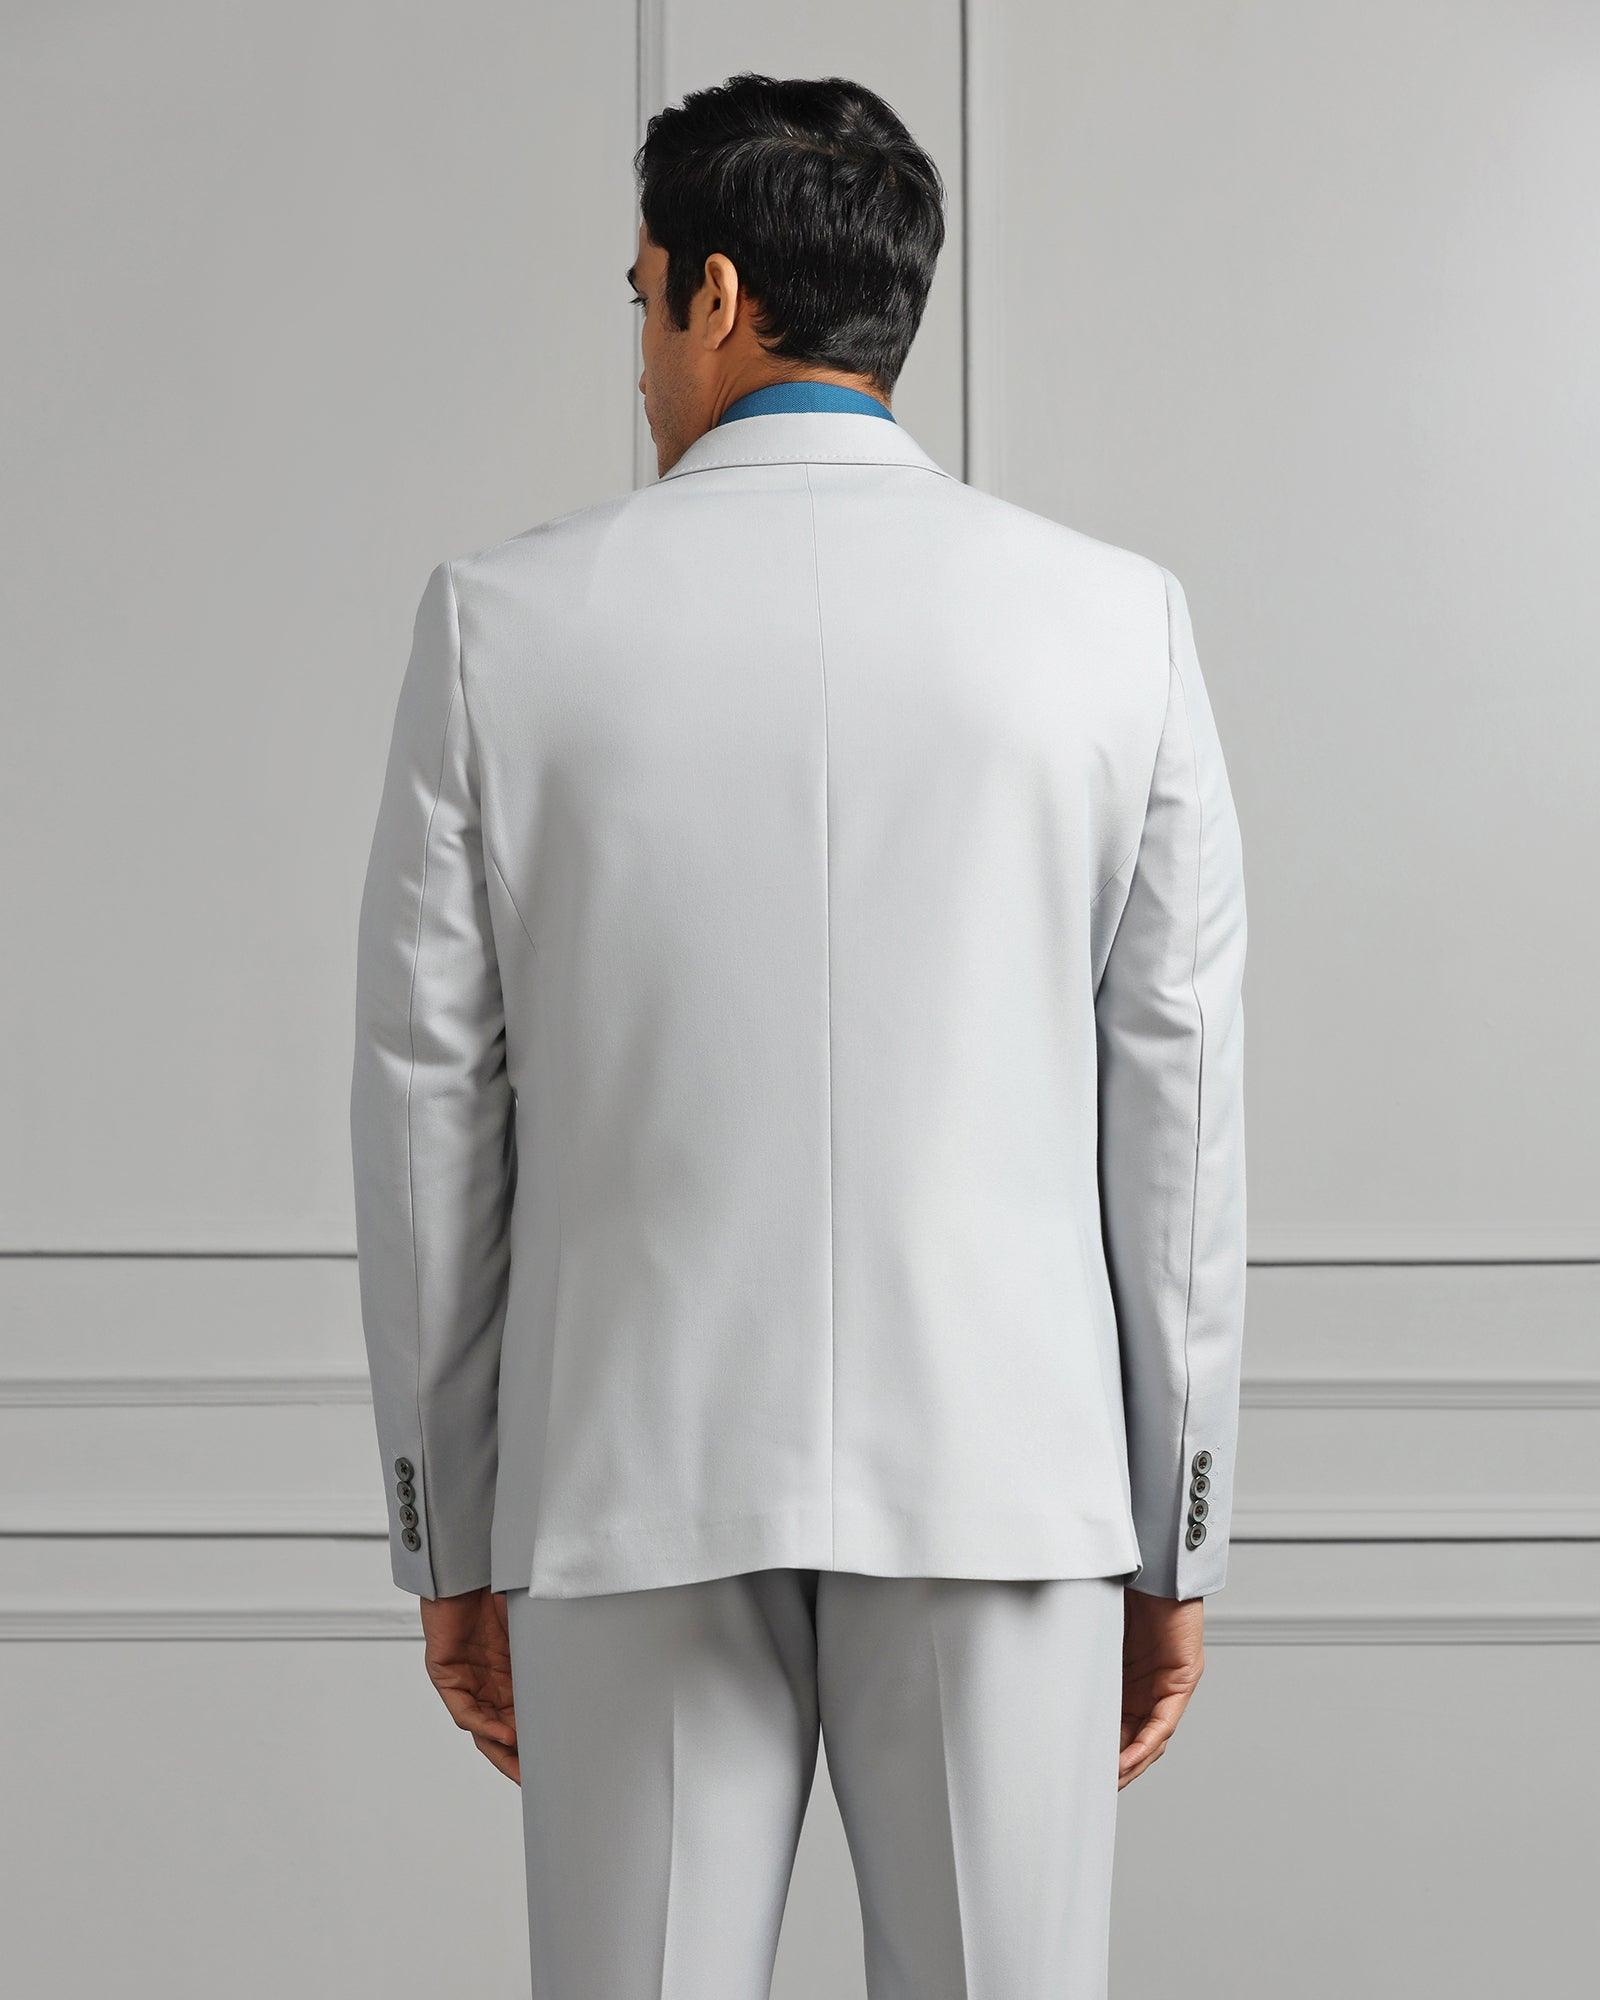 Man in White Suit Jacket · Free Stock Photo